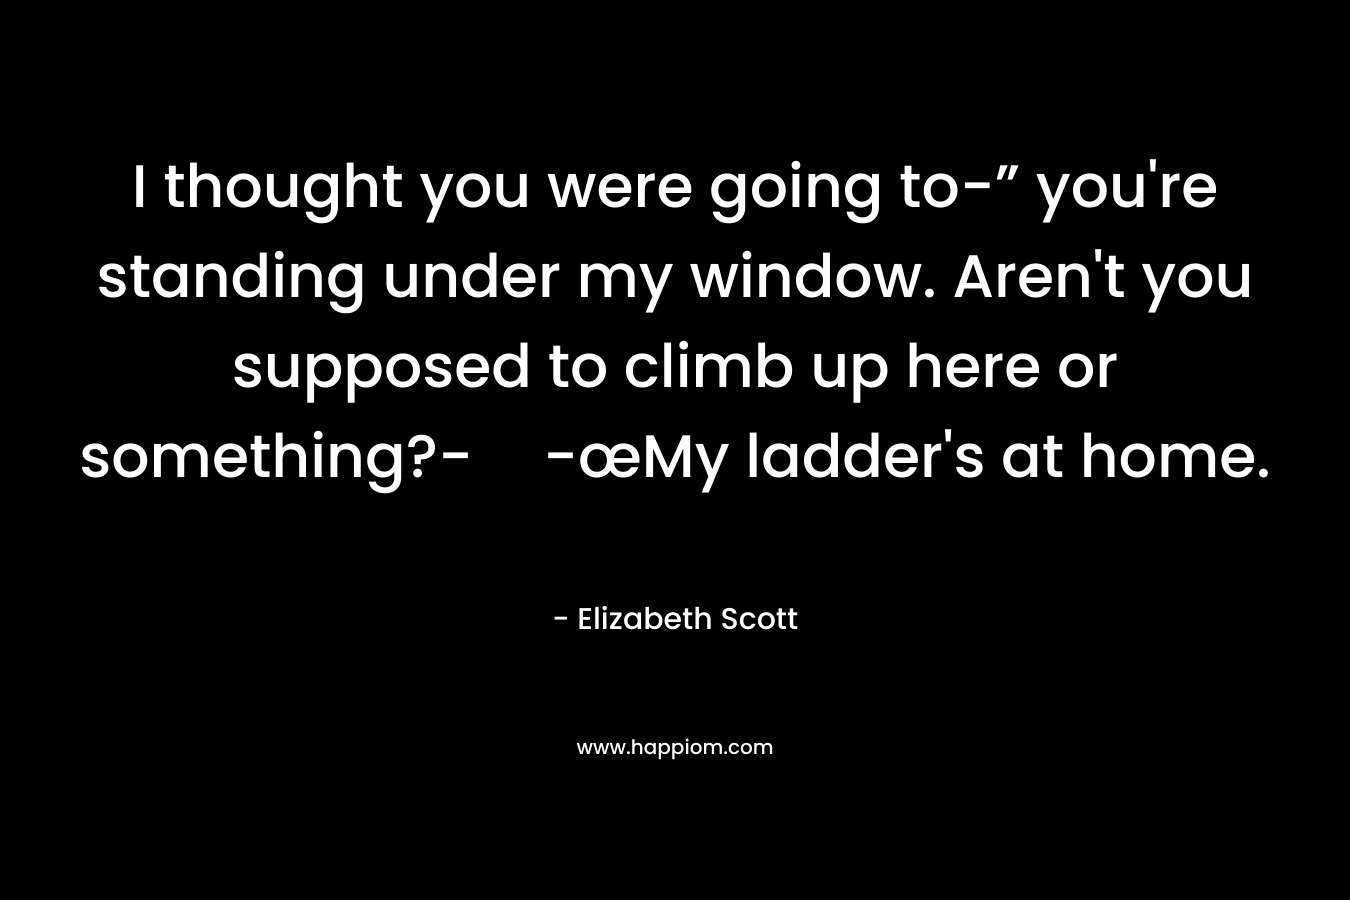 I thought you were going to-” you’re standing under my window. Aren’t you supposed to climb up here or something?--œMy ladder’s at home. – Elizabeth Scott